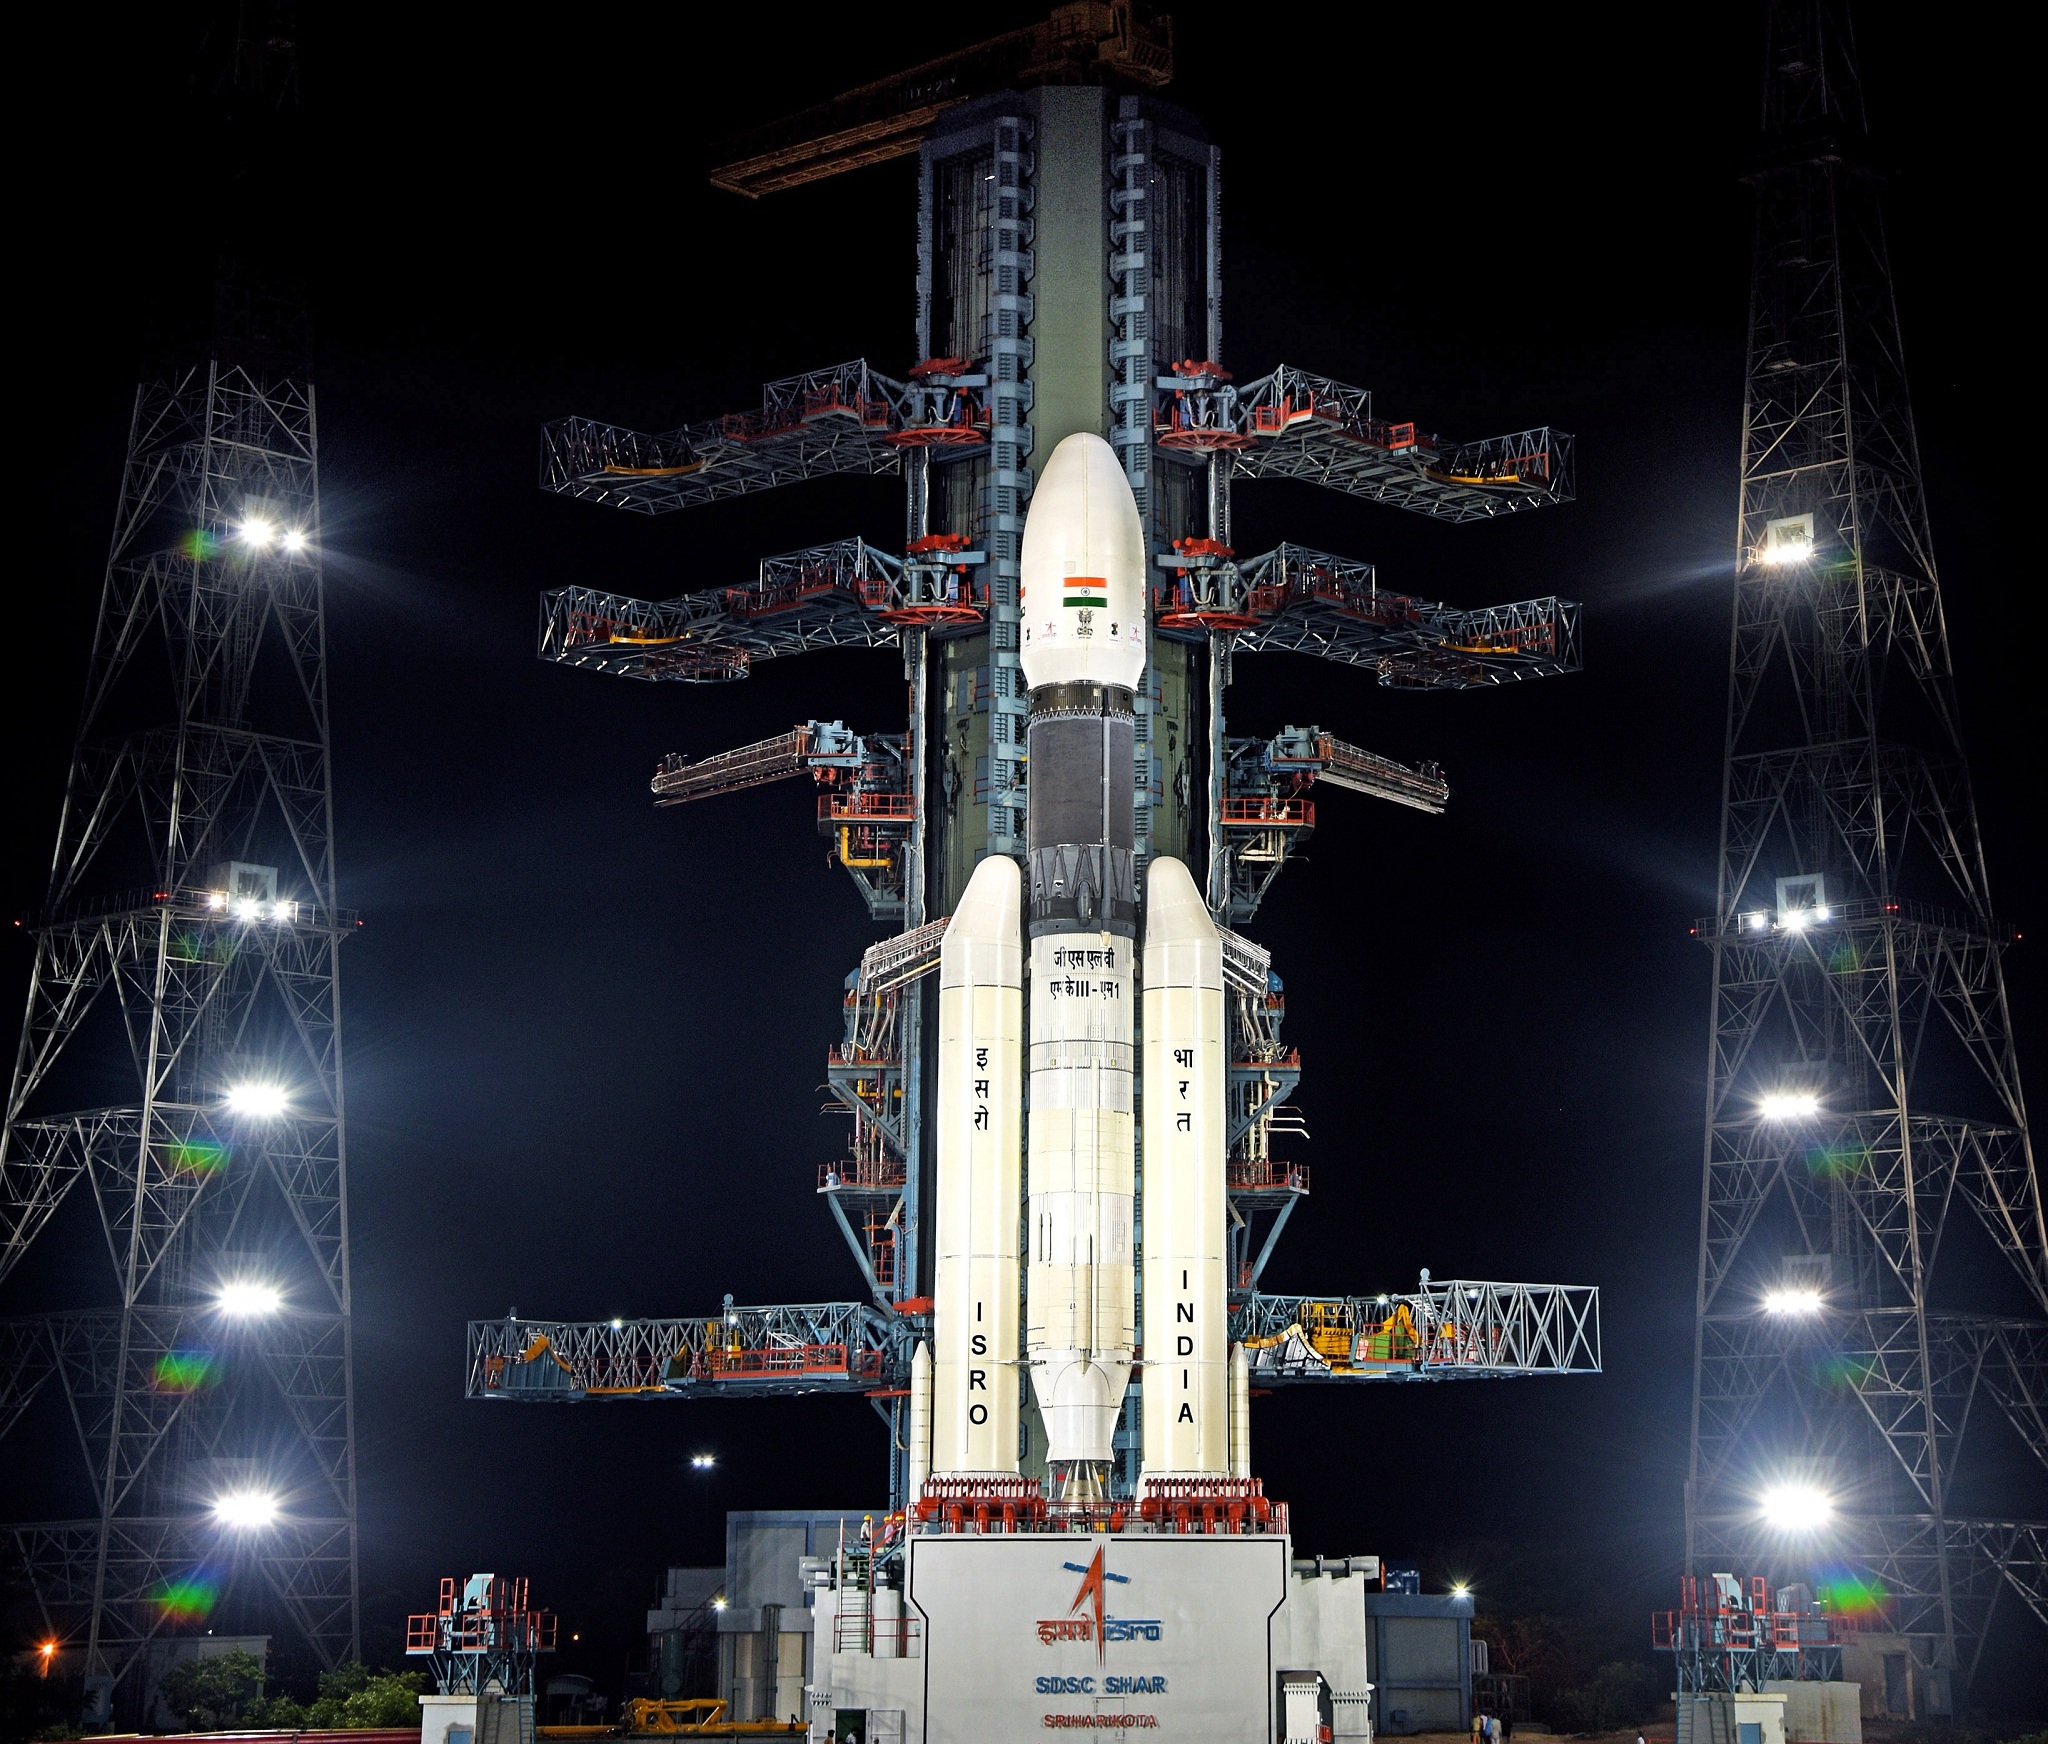 GSLV_Mk_III_M1,_Chandrayaan-2_-_Front_view_of_GSLV_Mk_III_M1_vehicle_at_the_Second_Launch_Pad_01